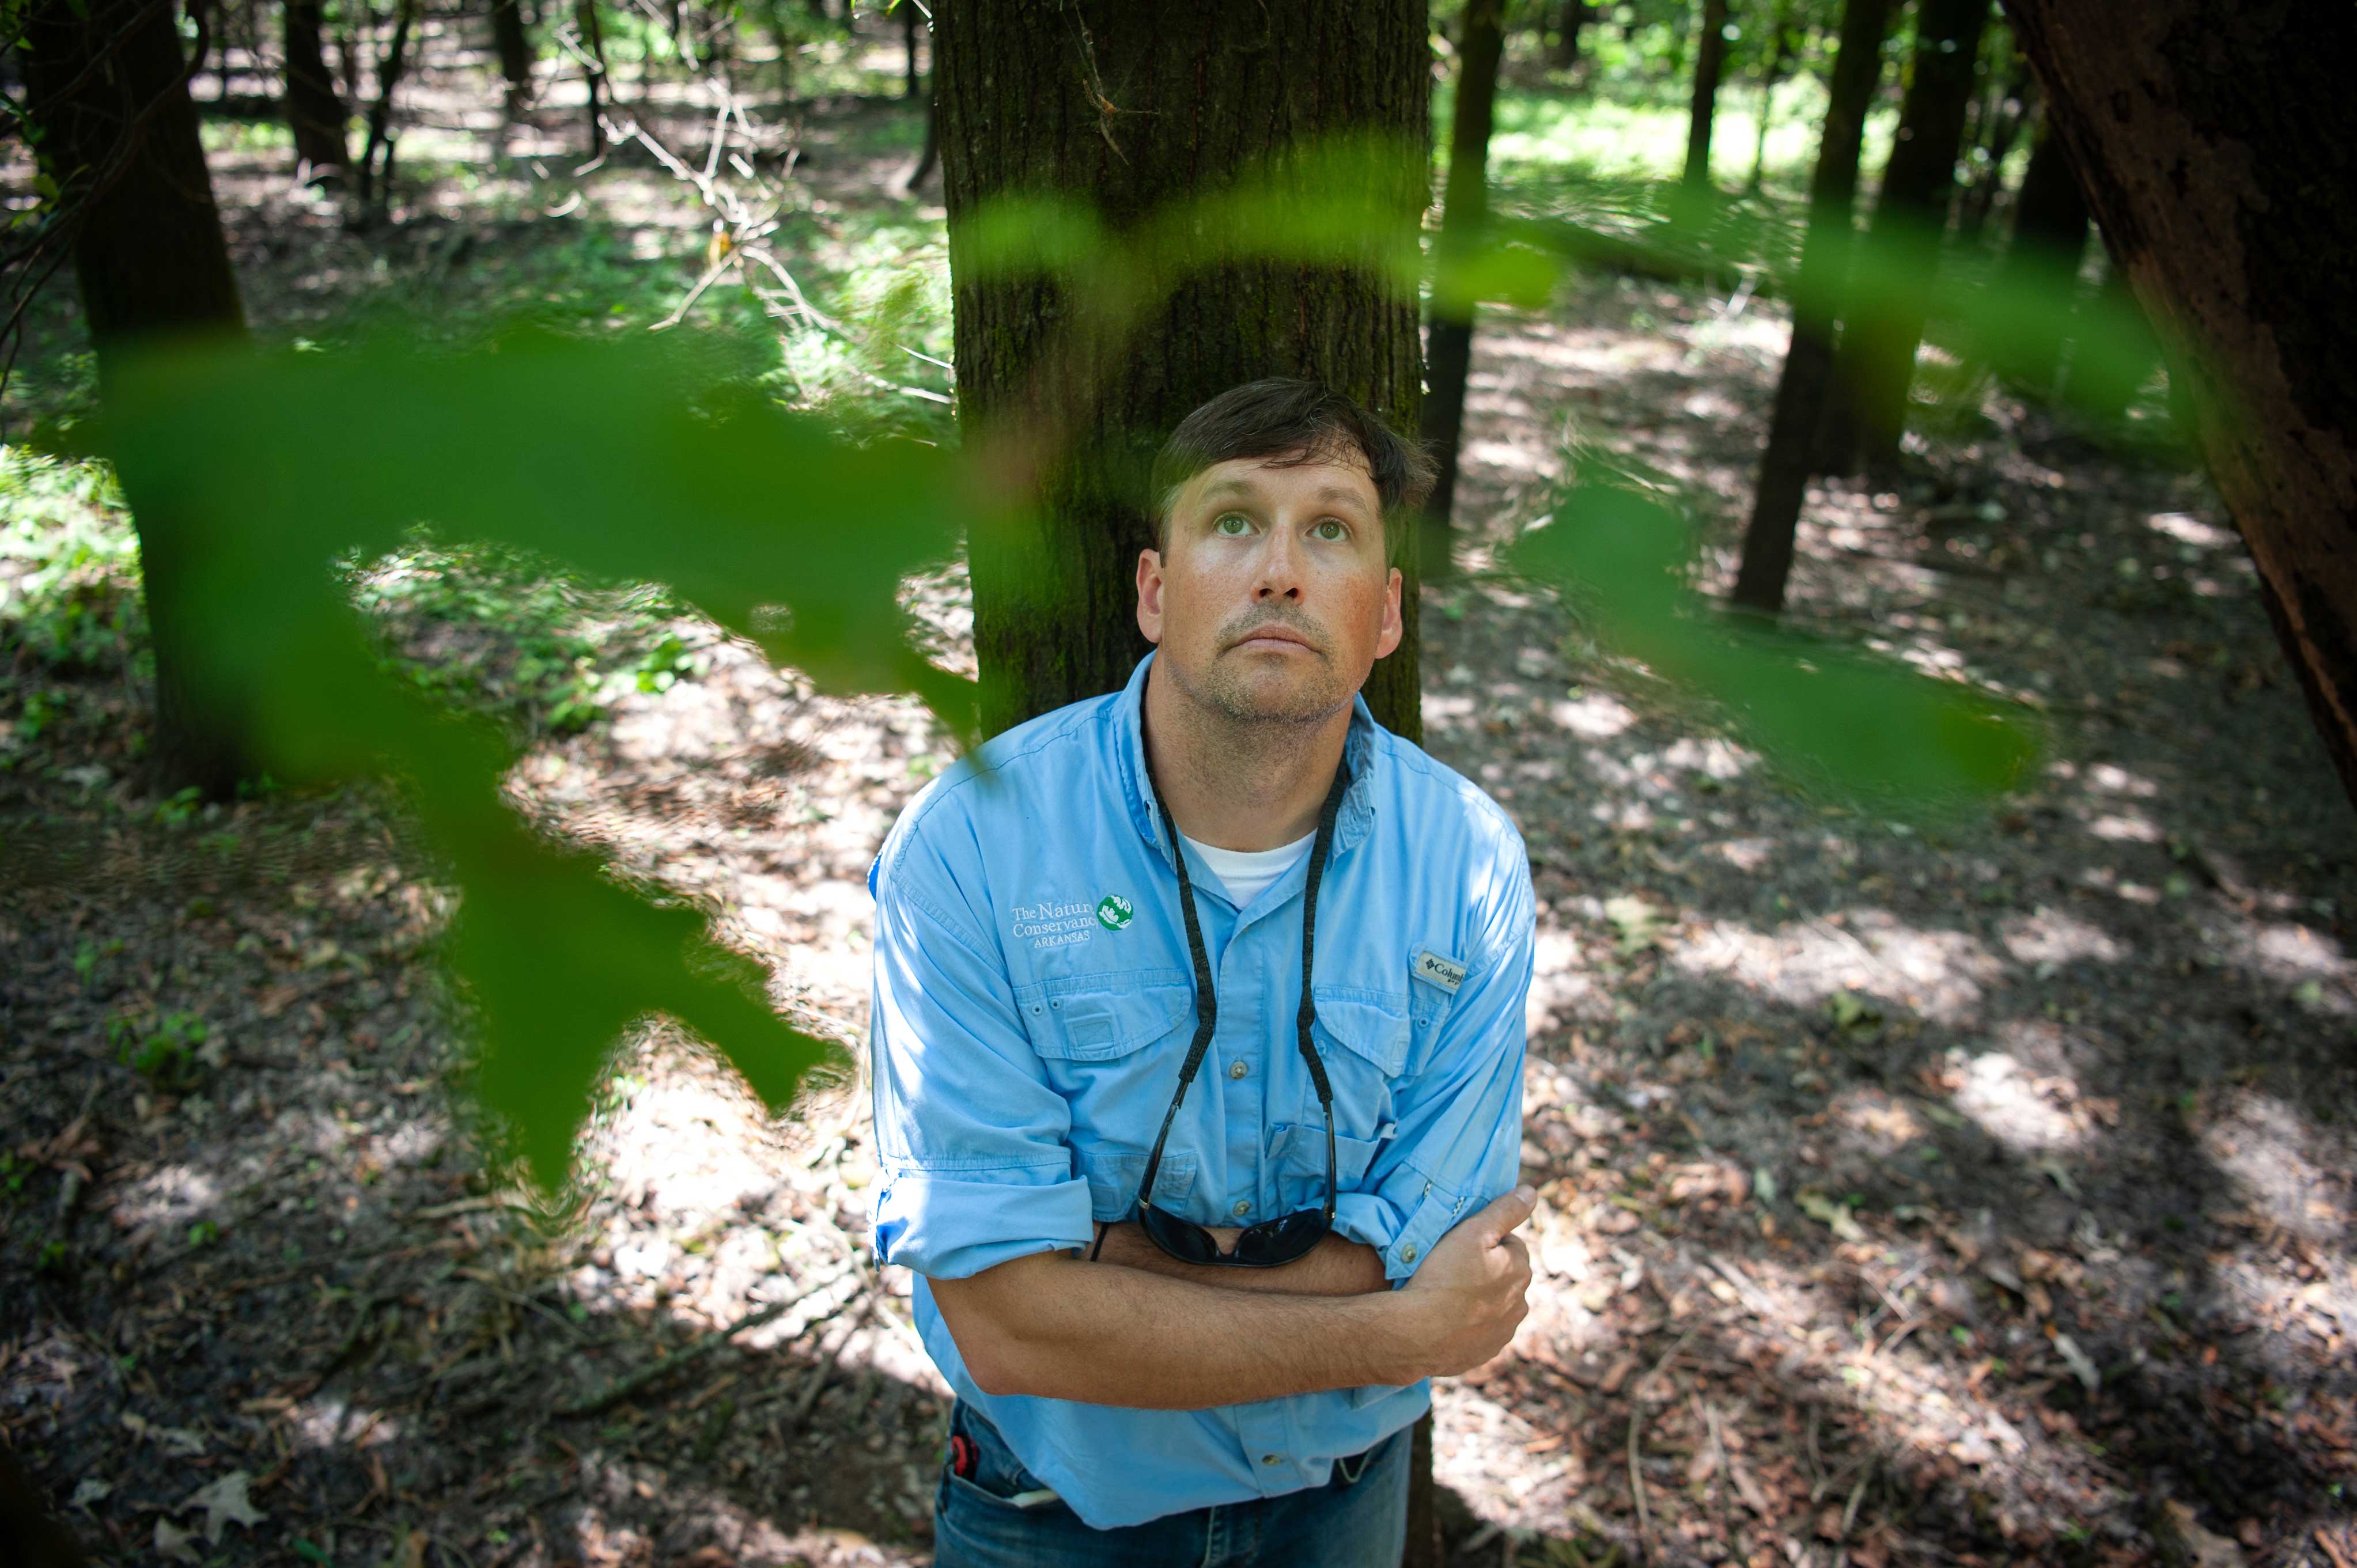 Jason Milks stands with his back against a tree in a forest and looks up at the tops of the trees.